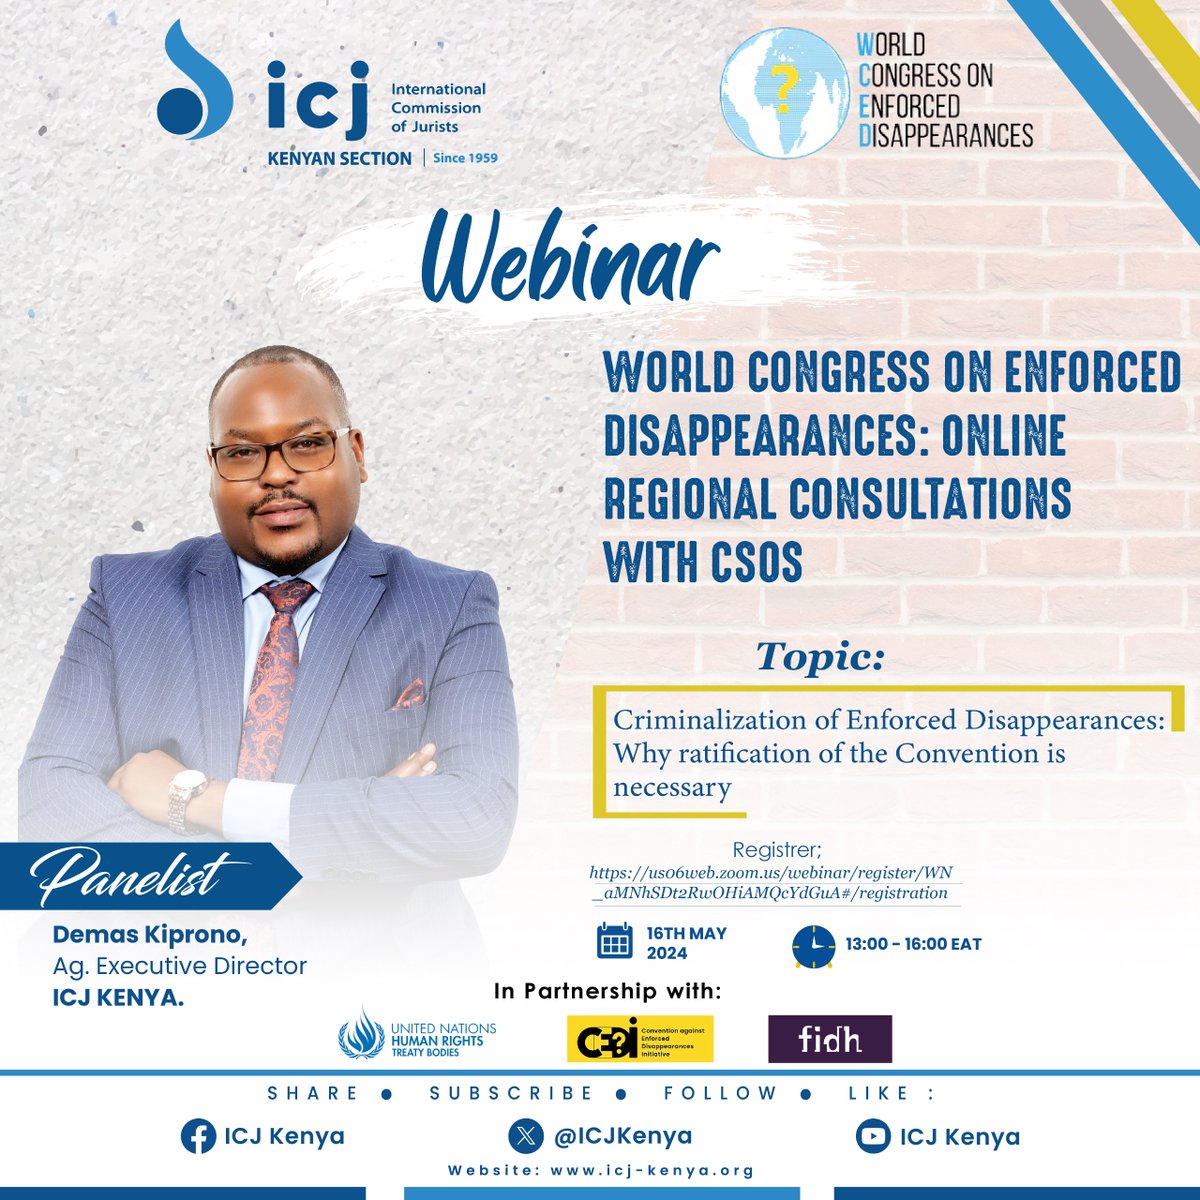 WEBINAR: Our Ag. Executive Director @kipdemas will be joining the World Congress on Enforced Disappearances virtually to discuss the need to criminalise the vice in Kenya and across Africa. Register and Join in: us06web.zoom.us/webinar/regist…